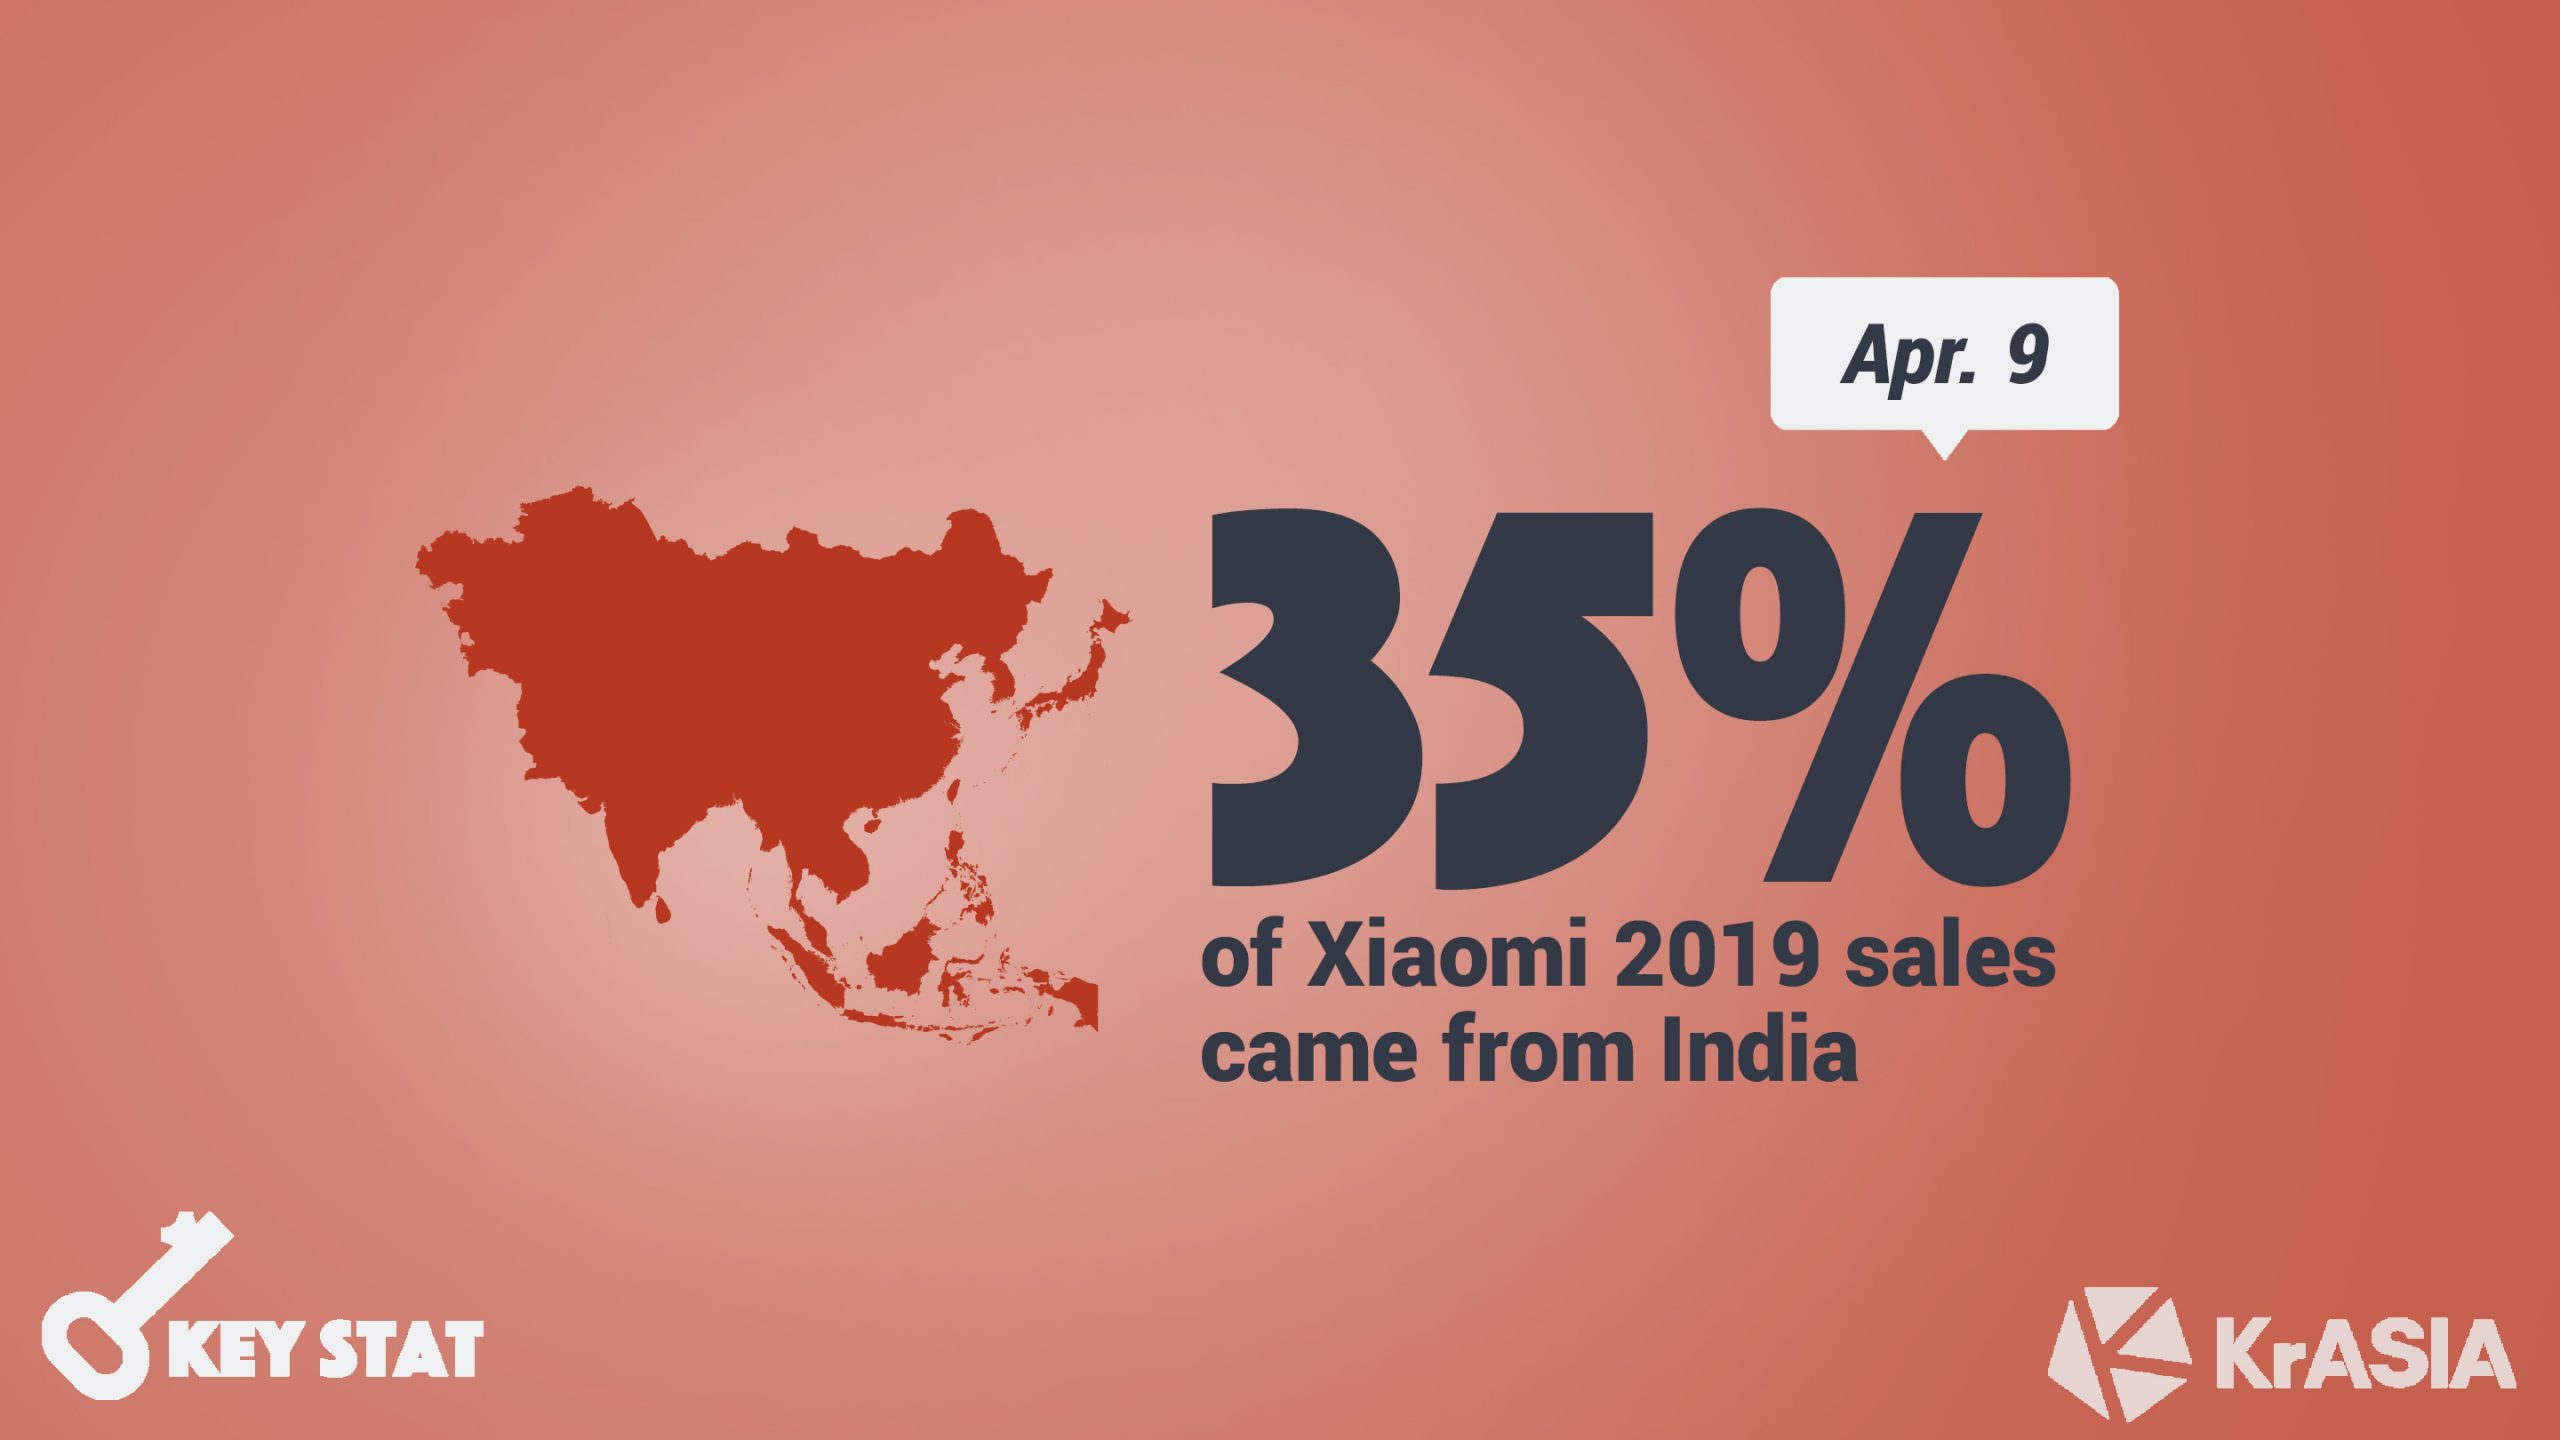 KEY STAT | Chinese phone makers see sales plunge from coronavirus outbreak as India and Southeast Asia close shops